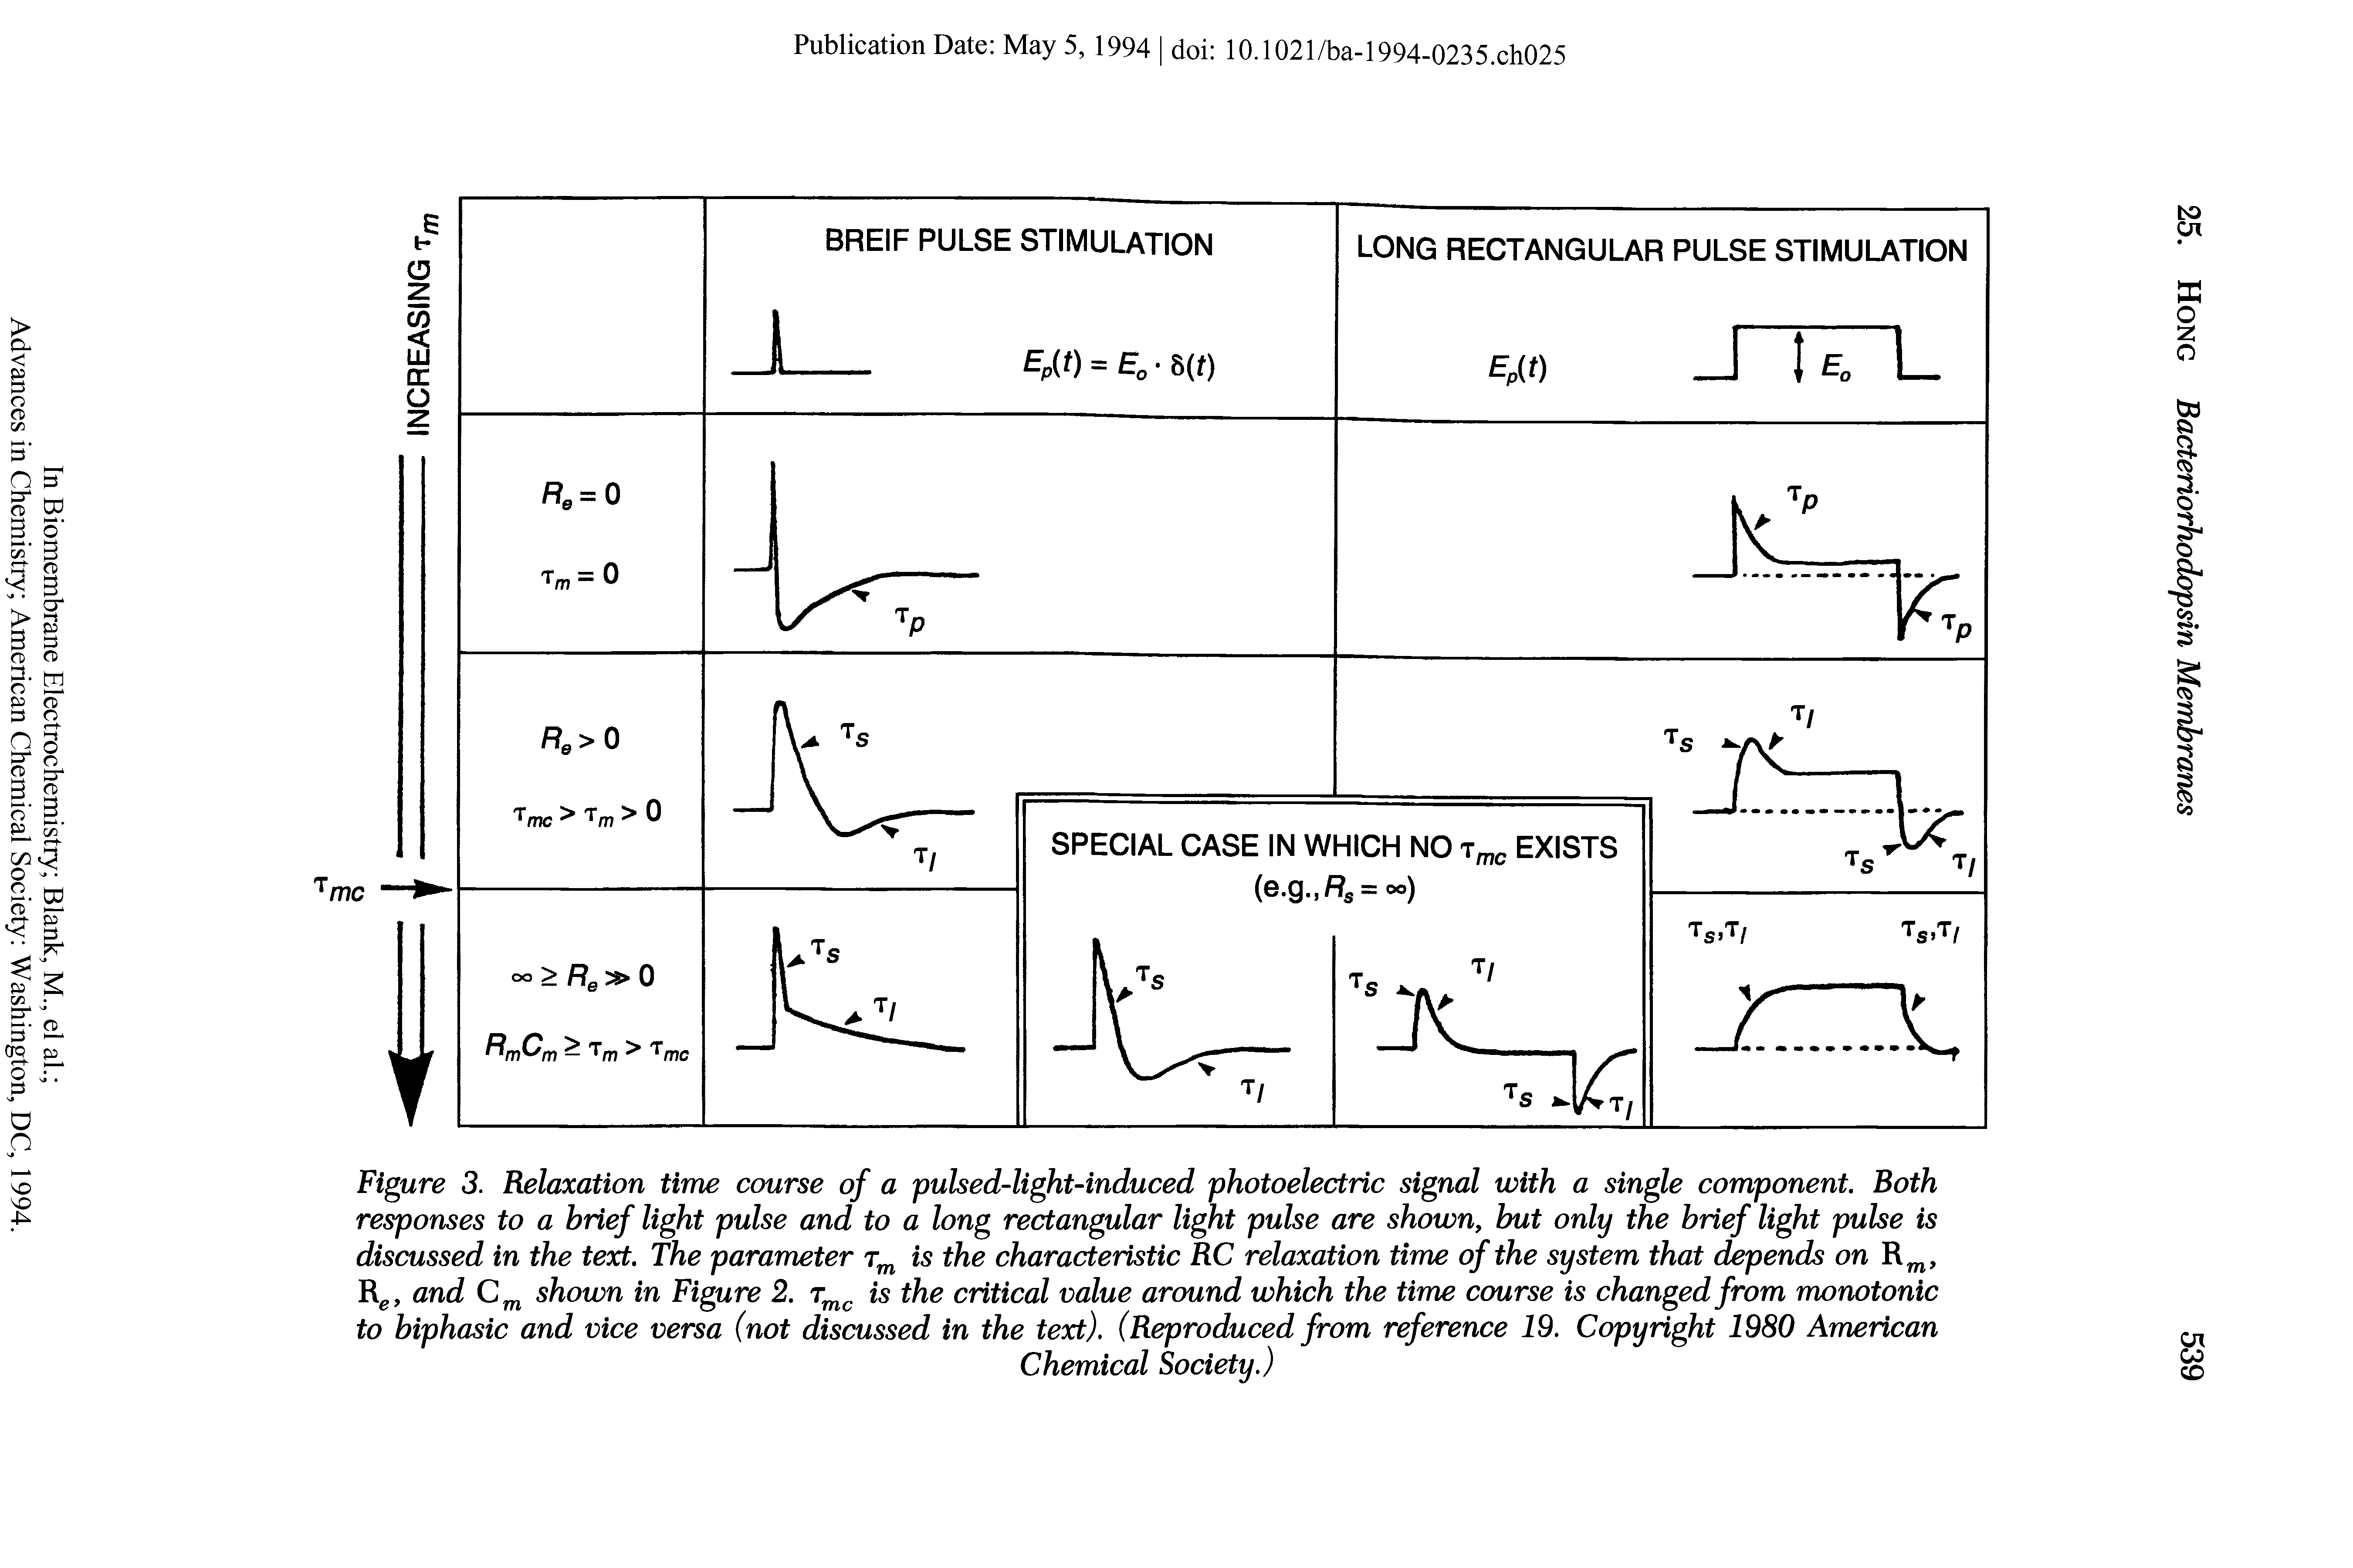 Figure 3. Relaxation time course of a pulsed-light-induced photoelectric signal with a single component. Both responses to a brief light pulse and to a long rectangular light pulse are shown, but only the brief light pulse is discussed in the text. The parameter rm is the characteristic RC relaxation time of the system that depends on Rm,...